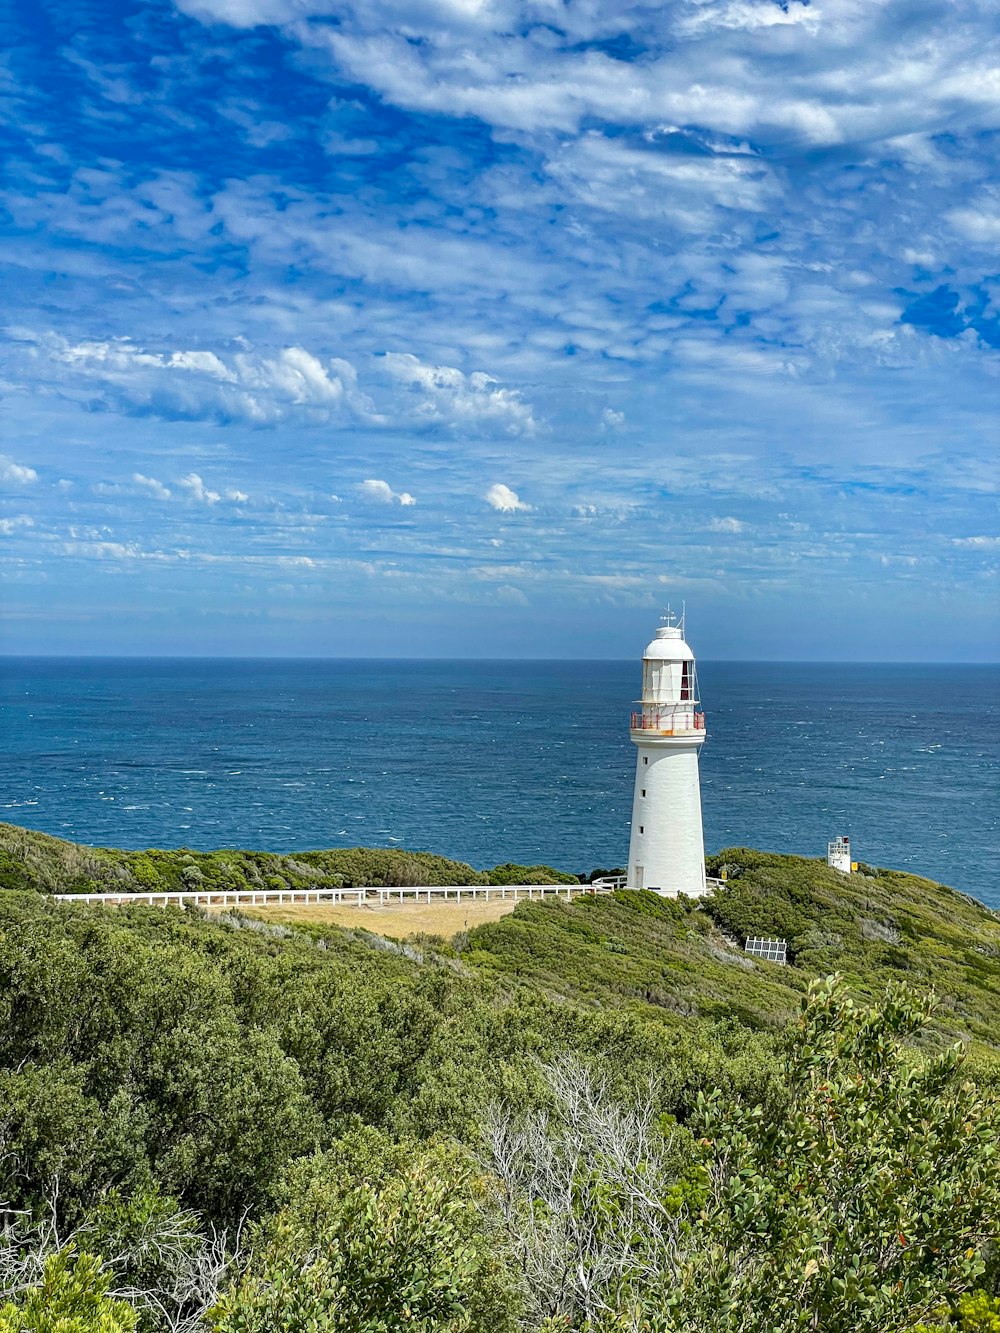 a lighthouse on a hill overlooking the ocean